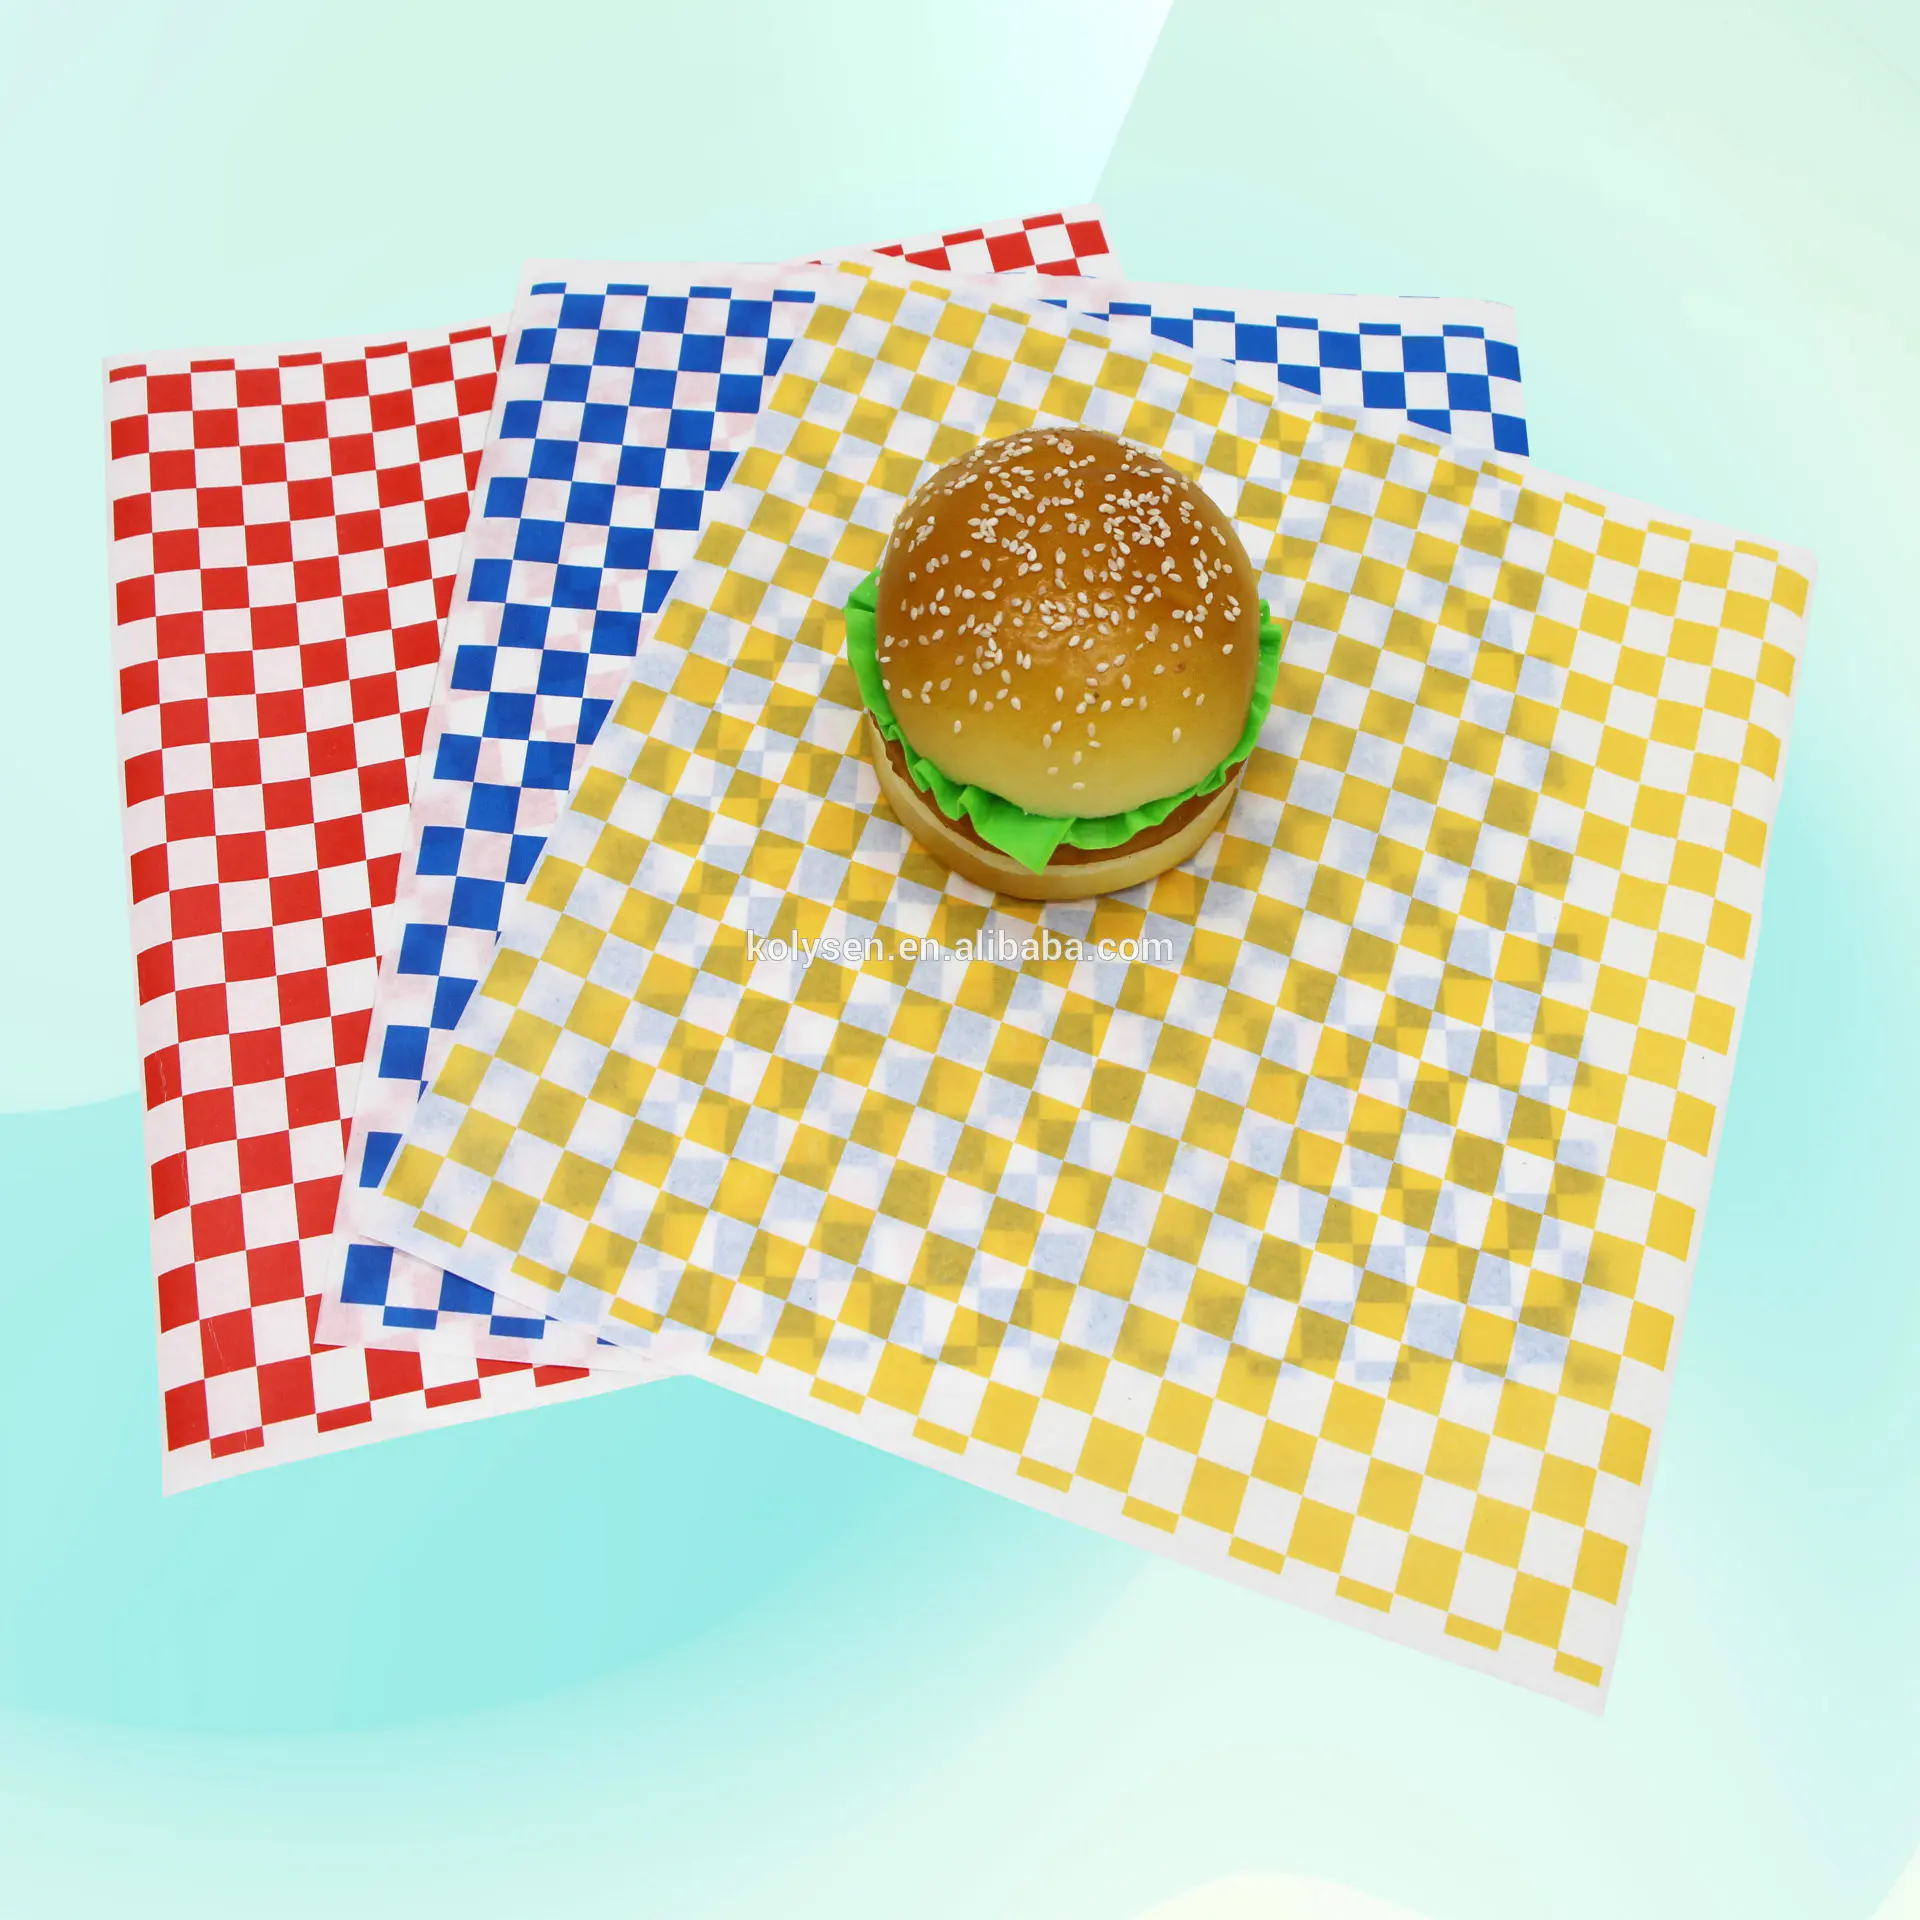 Customized Printed Greaseproof Paper for Burger/Sandwich Wrapping